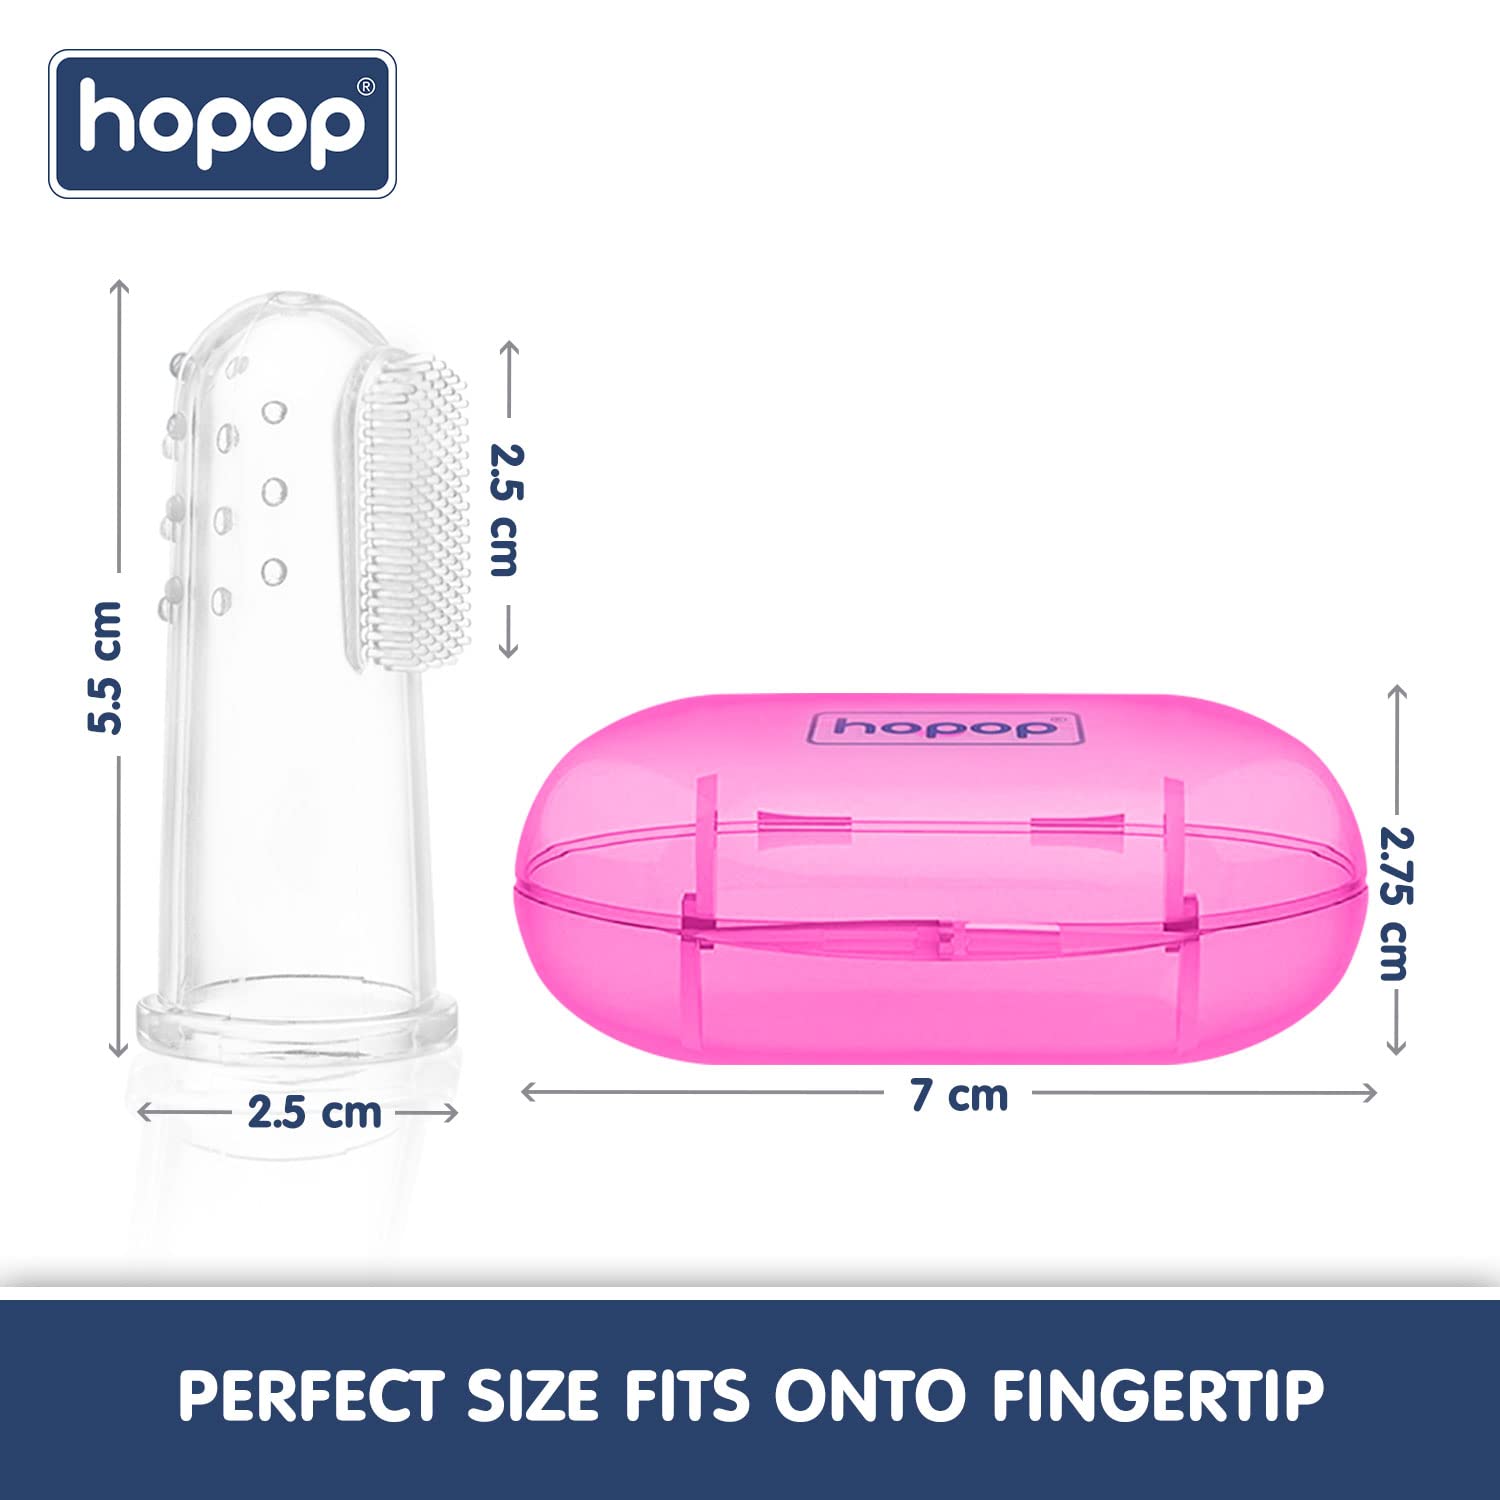 HOPOP Soft Silicone Finger Brush With Storage Case - Pink 0m+